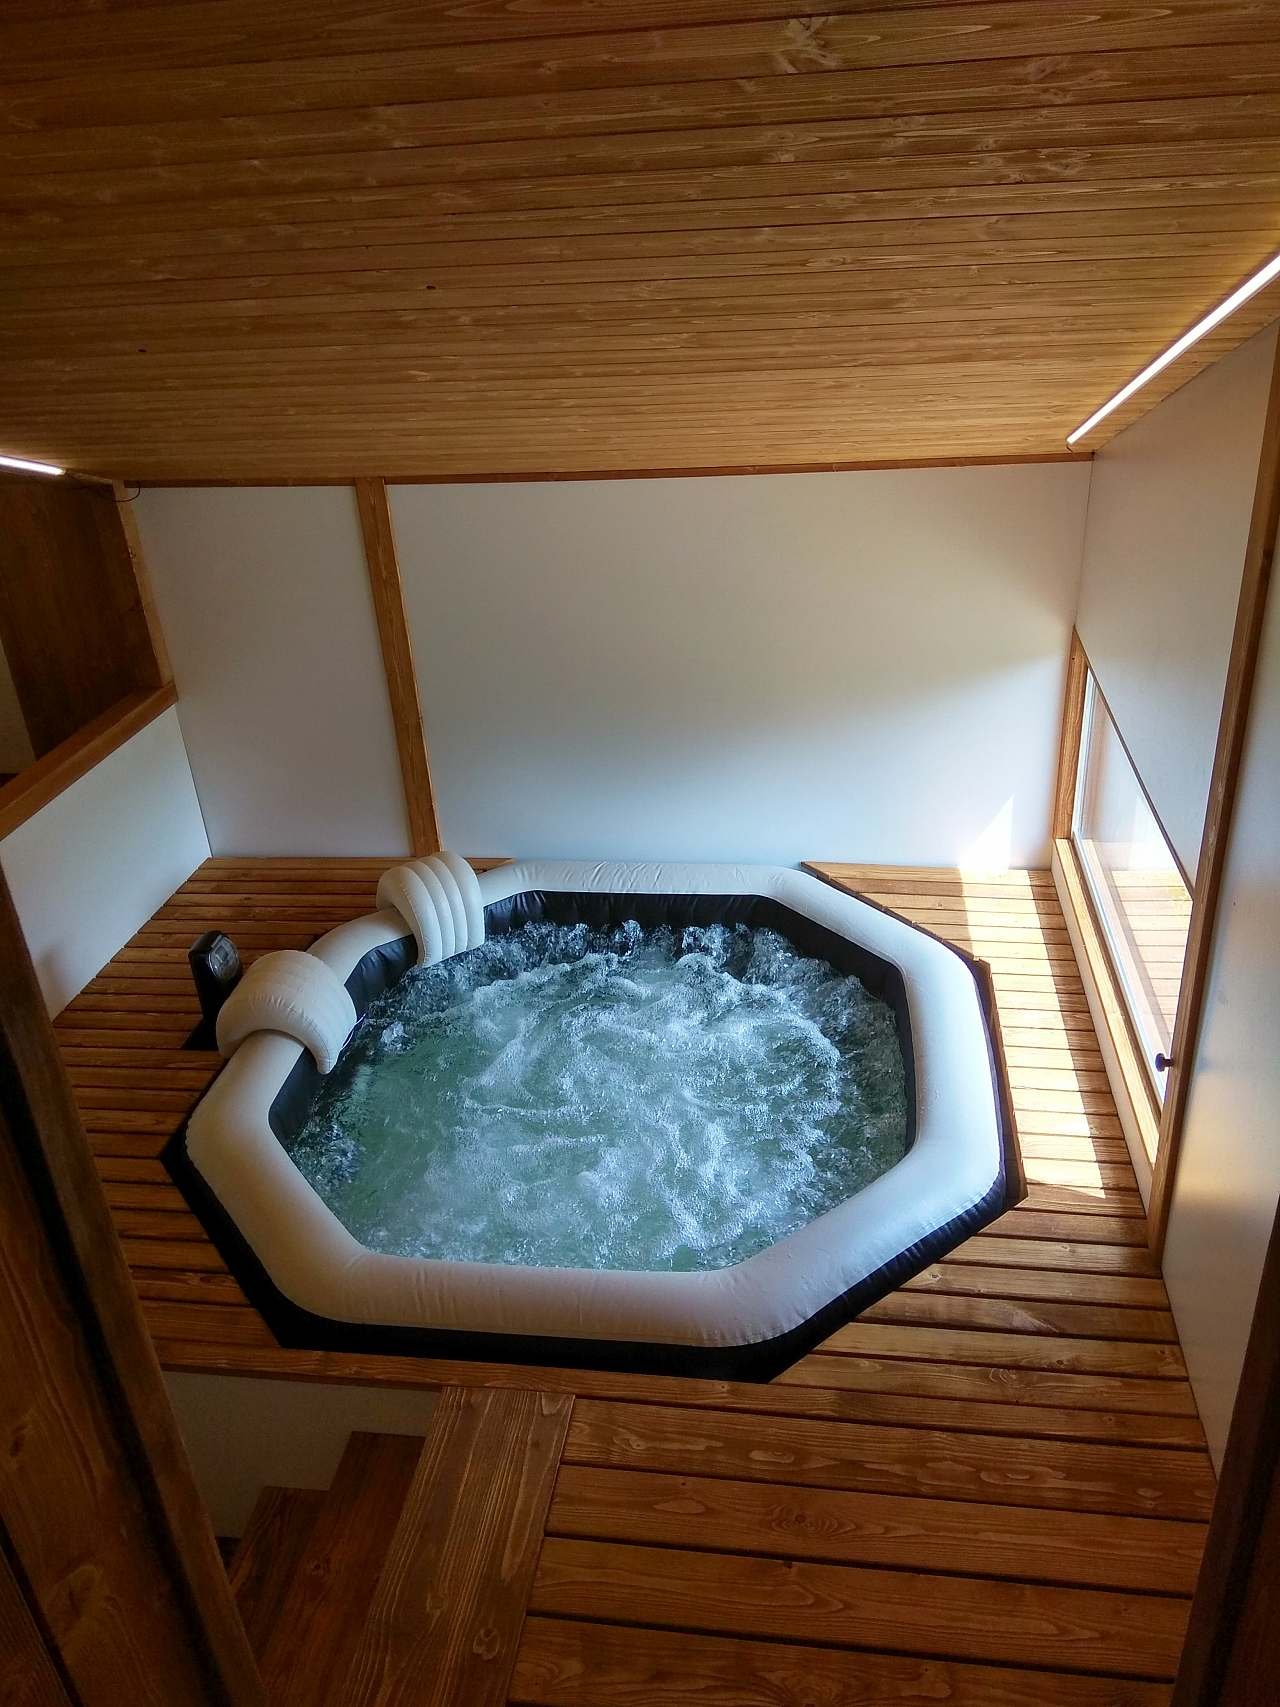 Hot tub for 6 people.